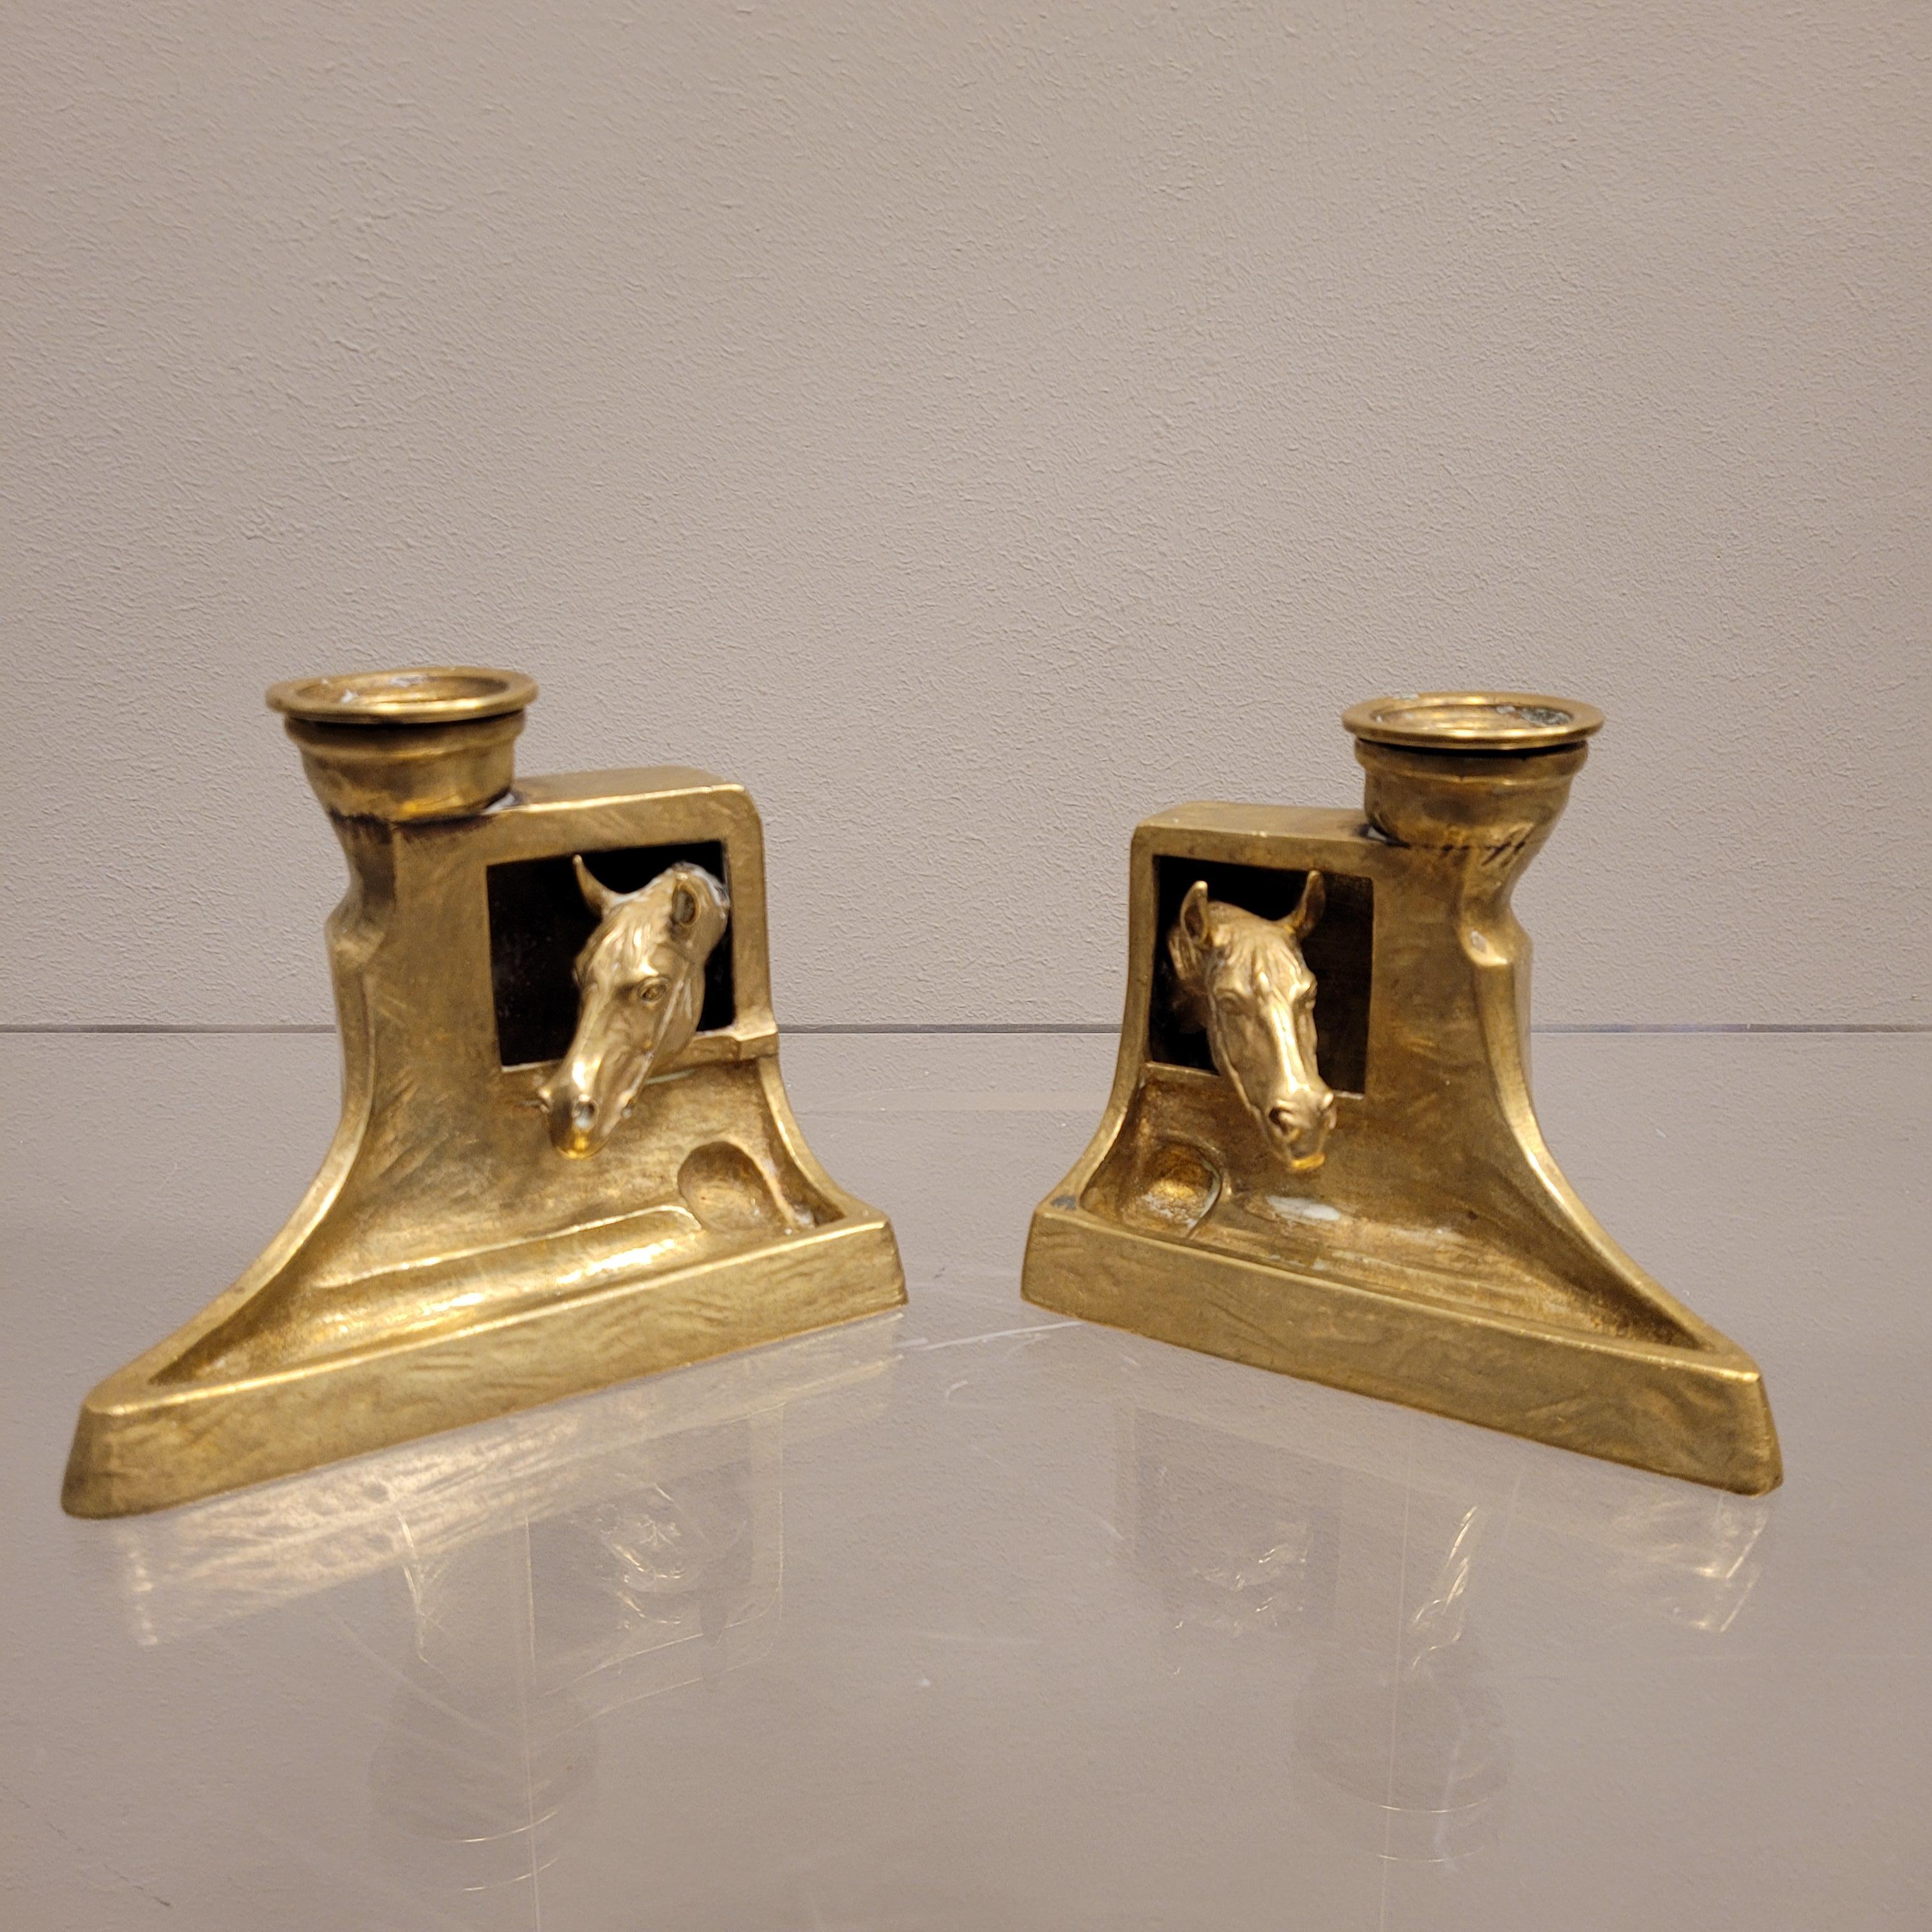 Pair of antique bronze bookends beautifully decorated with horse heads.
They were actually lamp bases that were also used as a candelabra, that is, three in one.
Signed by the Austrian sculptor Otto Kainz.
The condition is good. Dimensions: